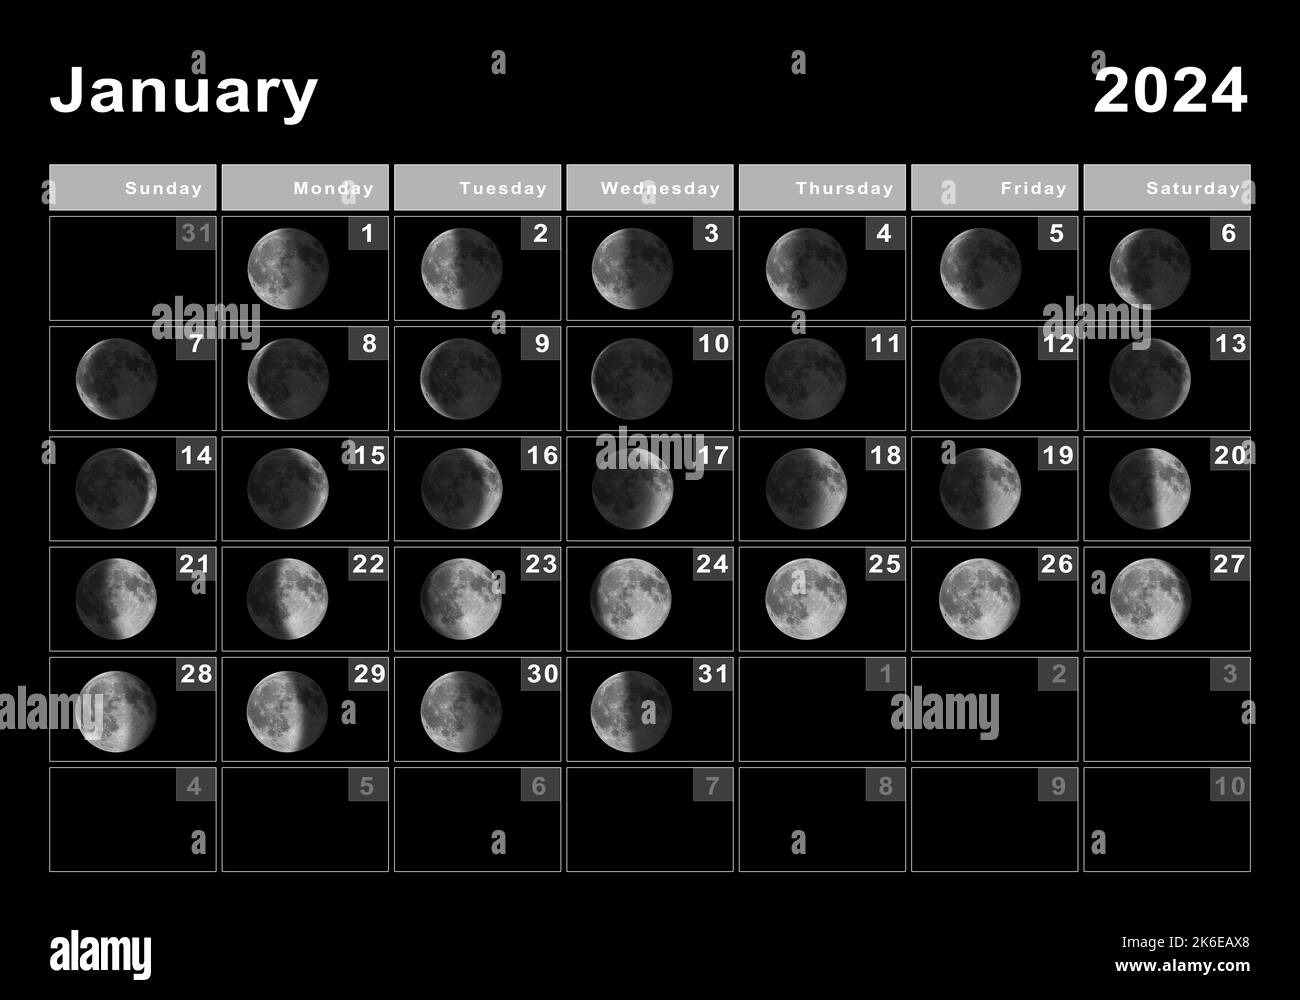 When Is The Next Full Moon In January 2024 Fanni Clotilda